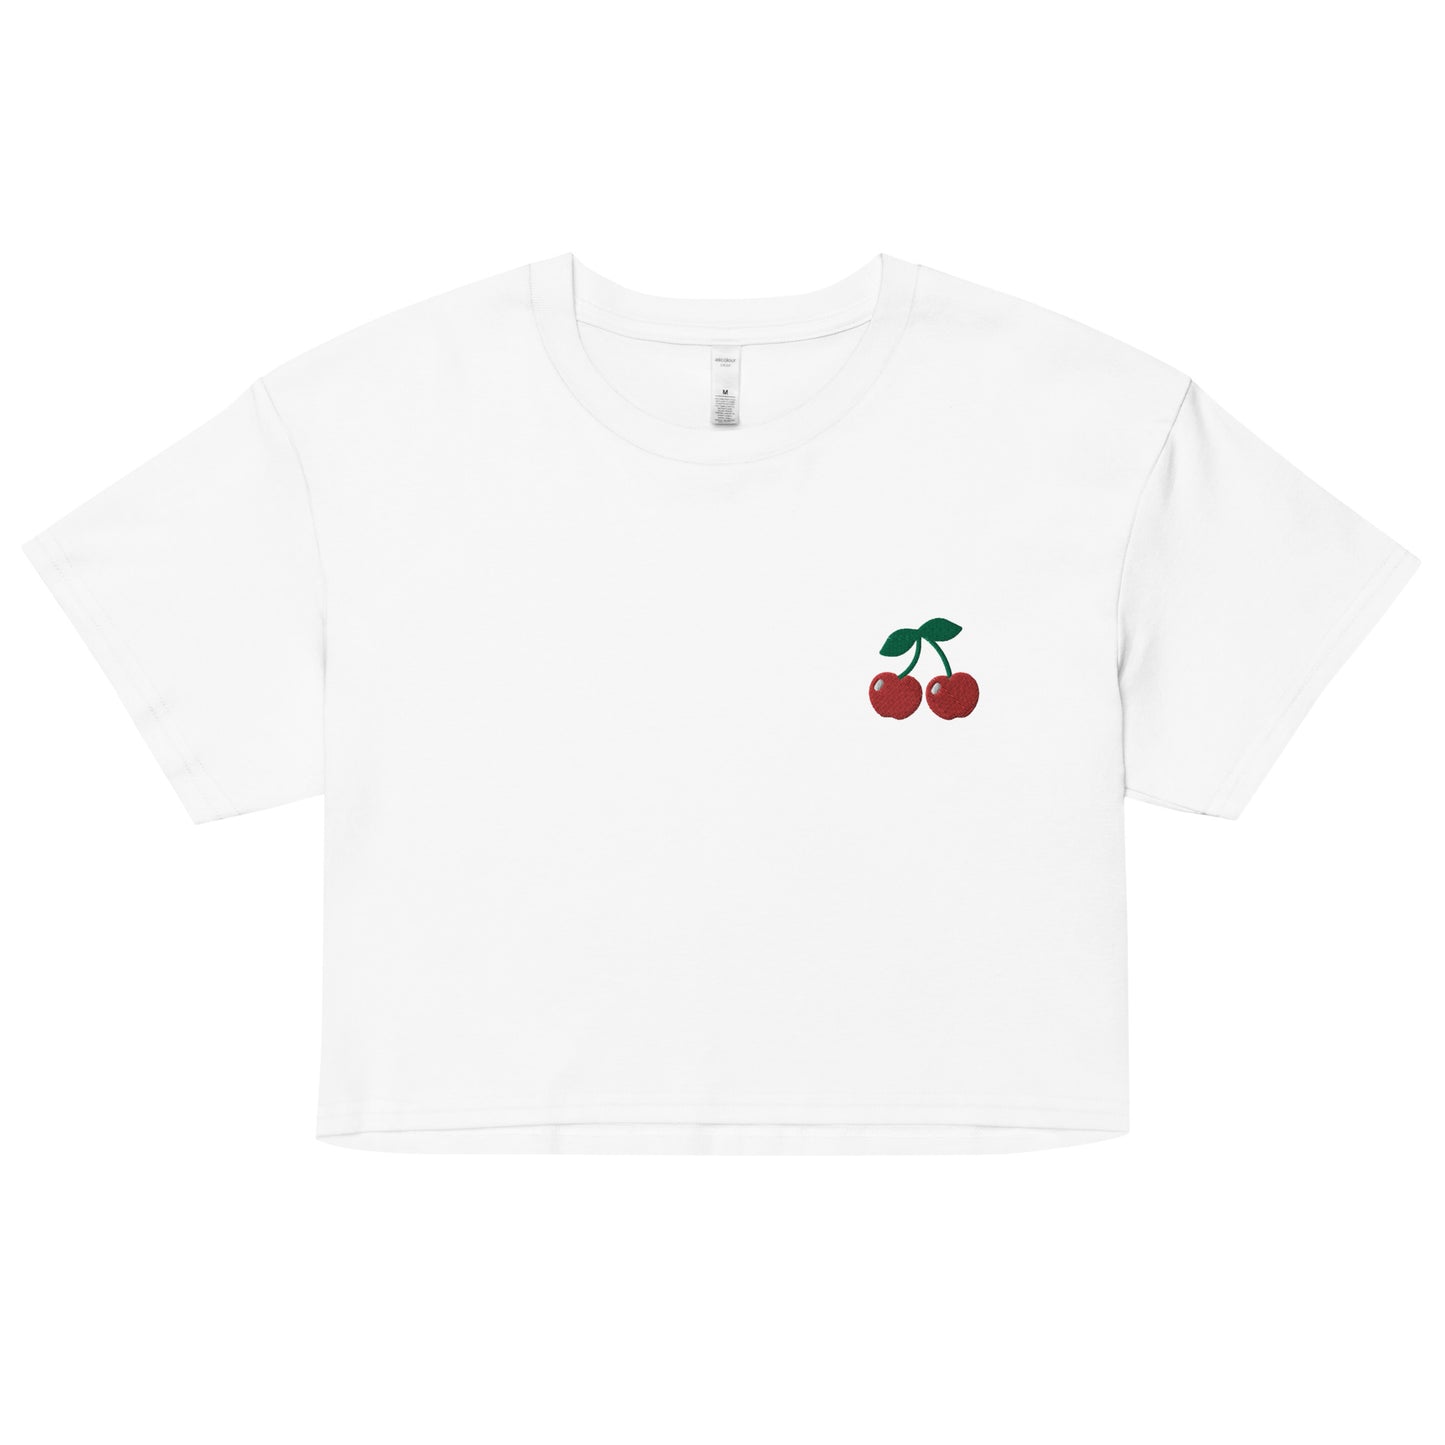 A relaxed, modest white crop top features a subtle cherry emoji embroidery. Adding a touch of fruity to your look—a playful celebration of lgbtq culture! Made from 100% combed cotton. Available in Extra Small, Small, Medium, Large, Extra Large.